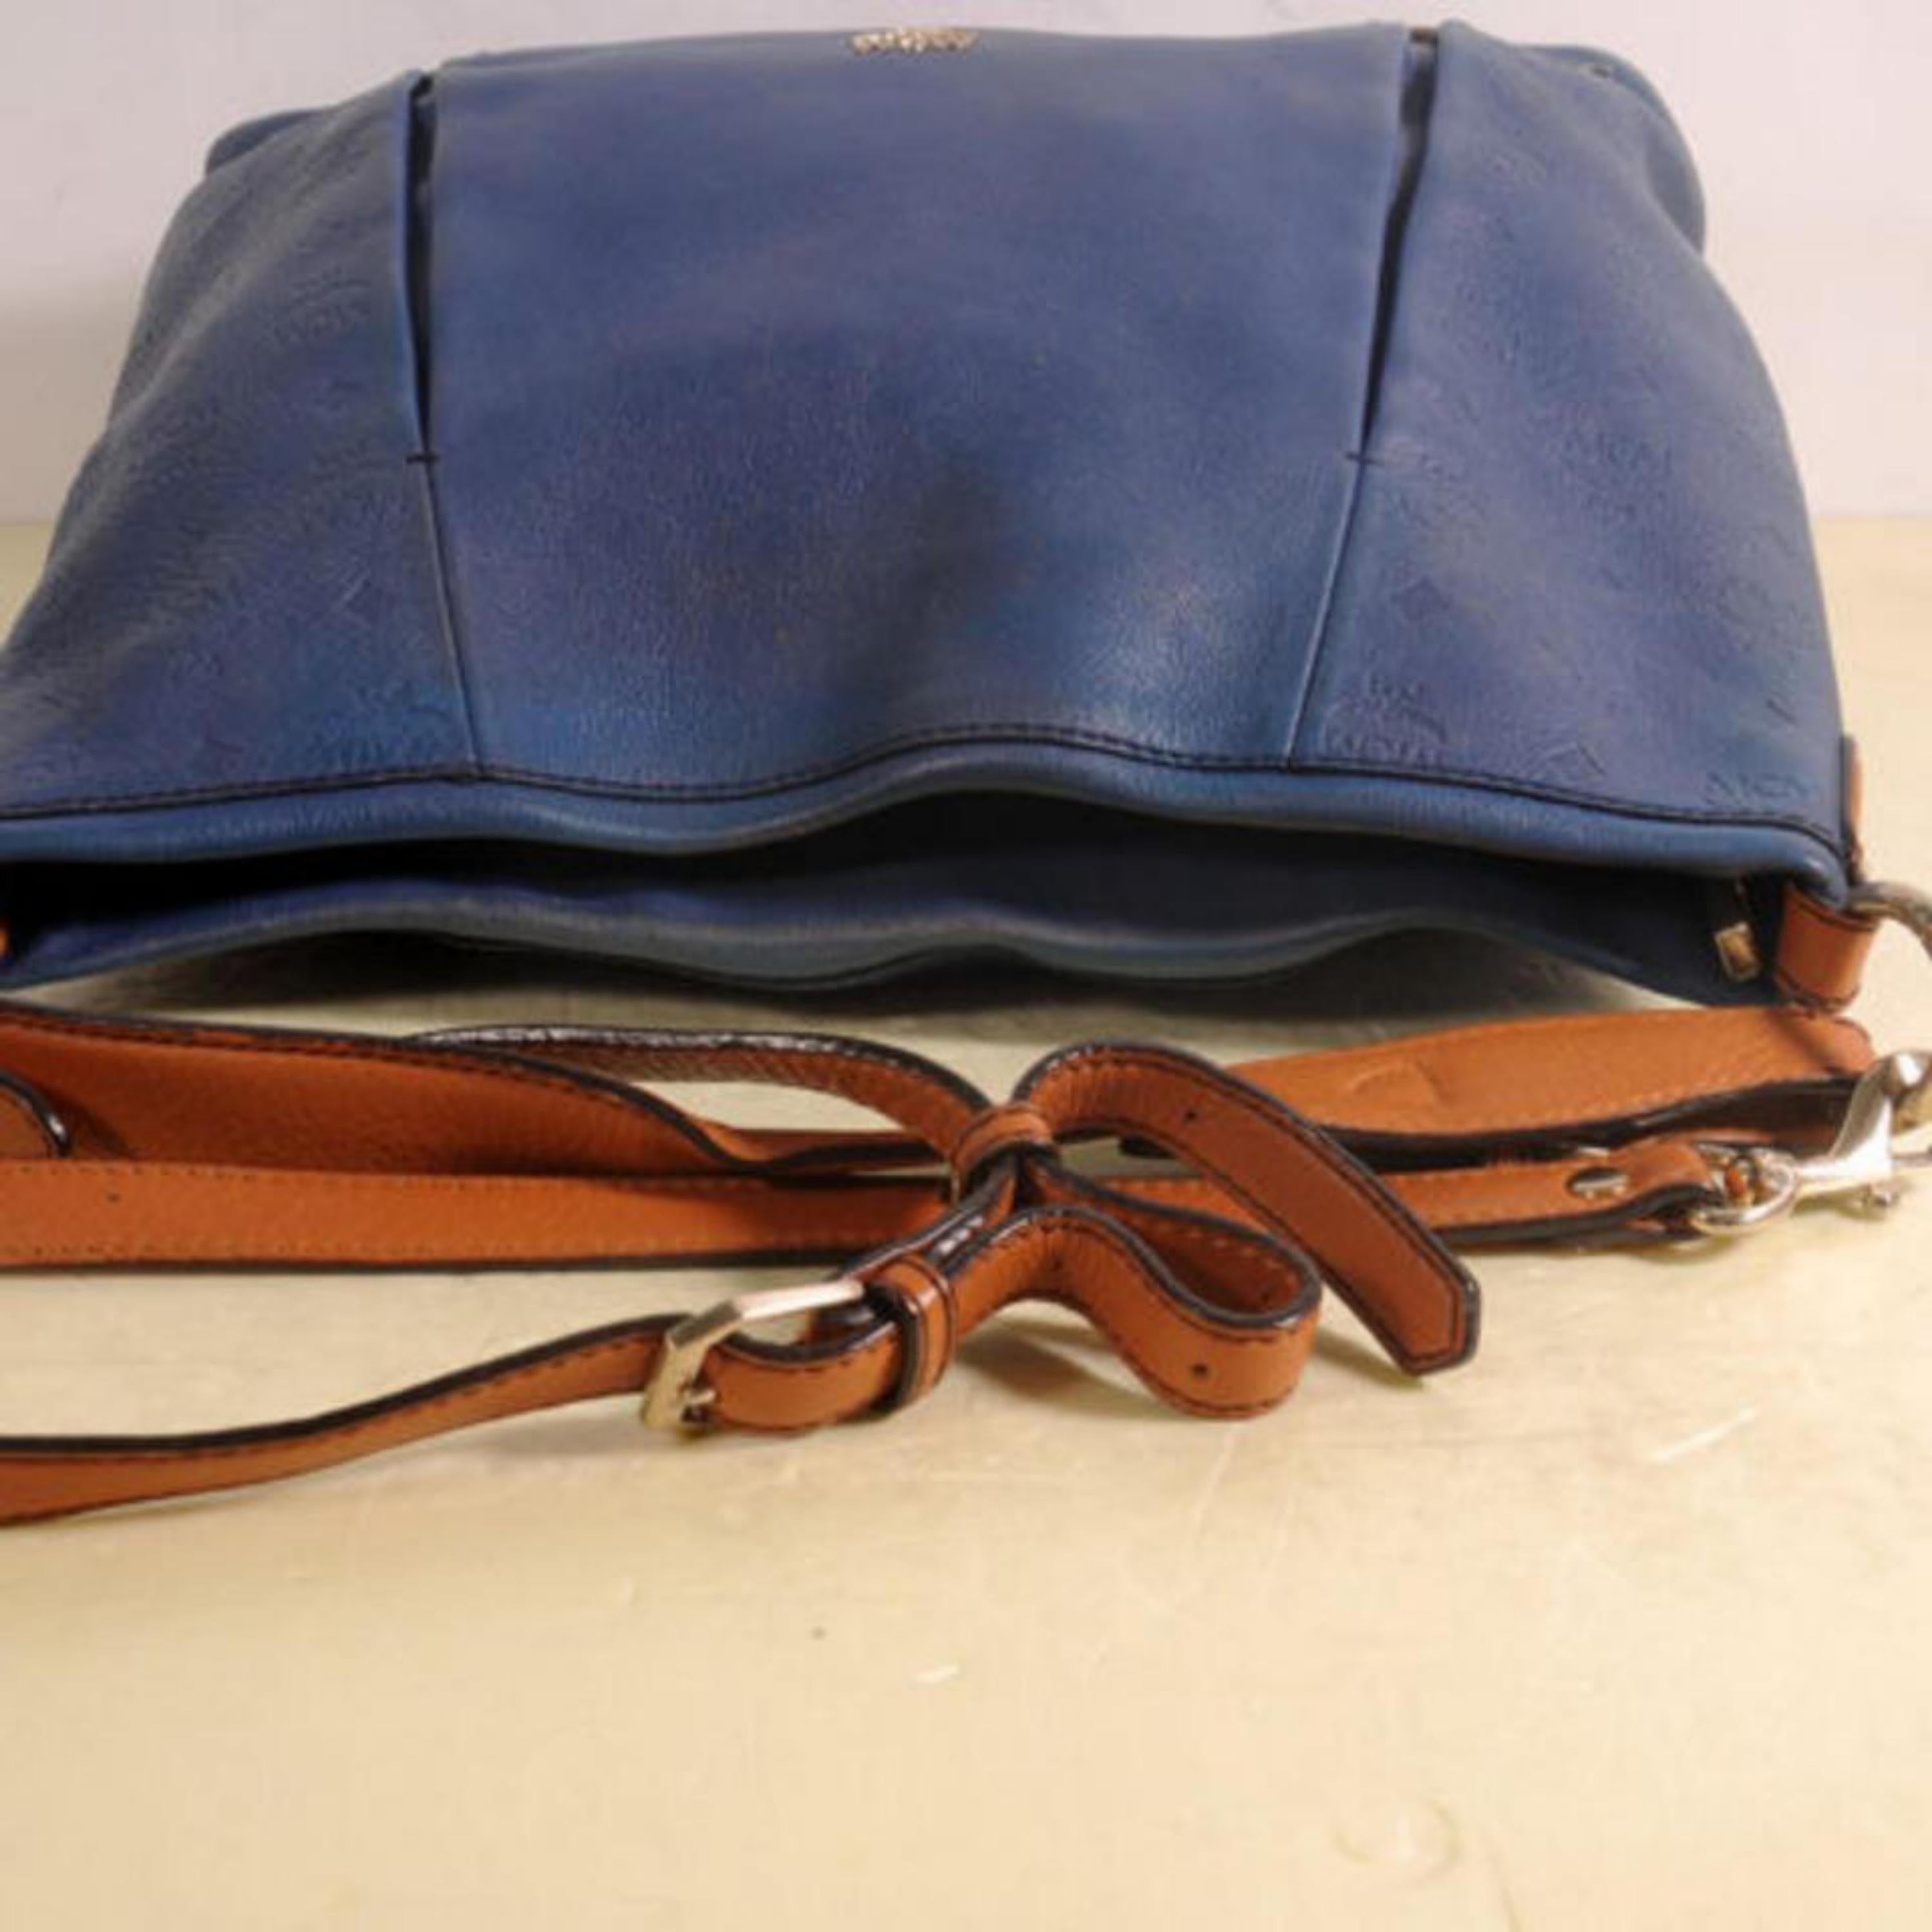 MCM Bicolor 2way Hobo 869446 Blue Leather Shoulder Bag In Good Condition For Sale In Forest Hills, NY